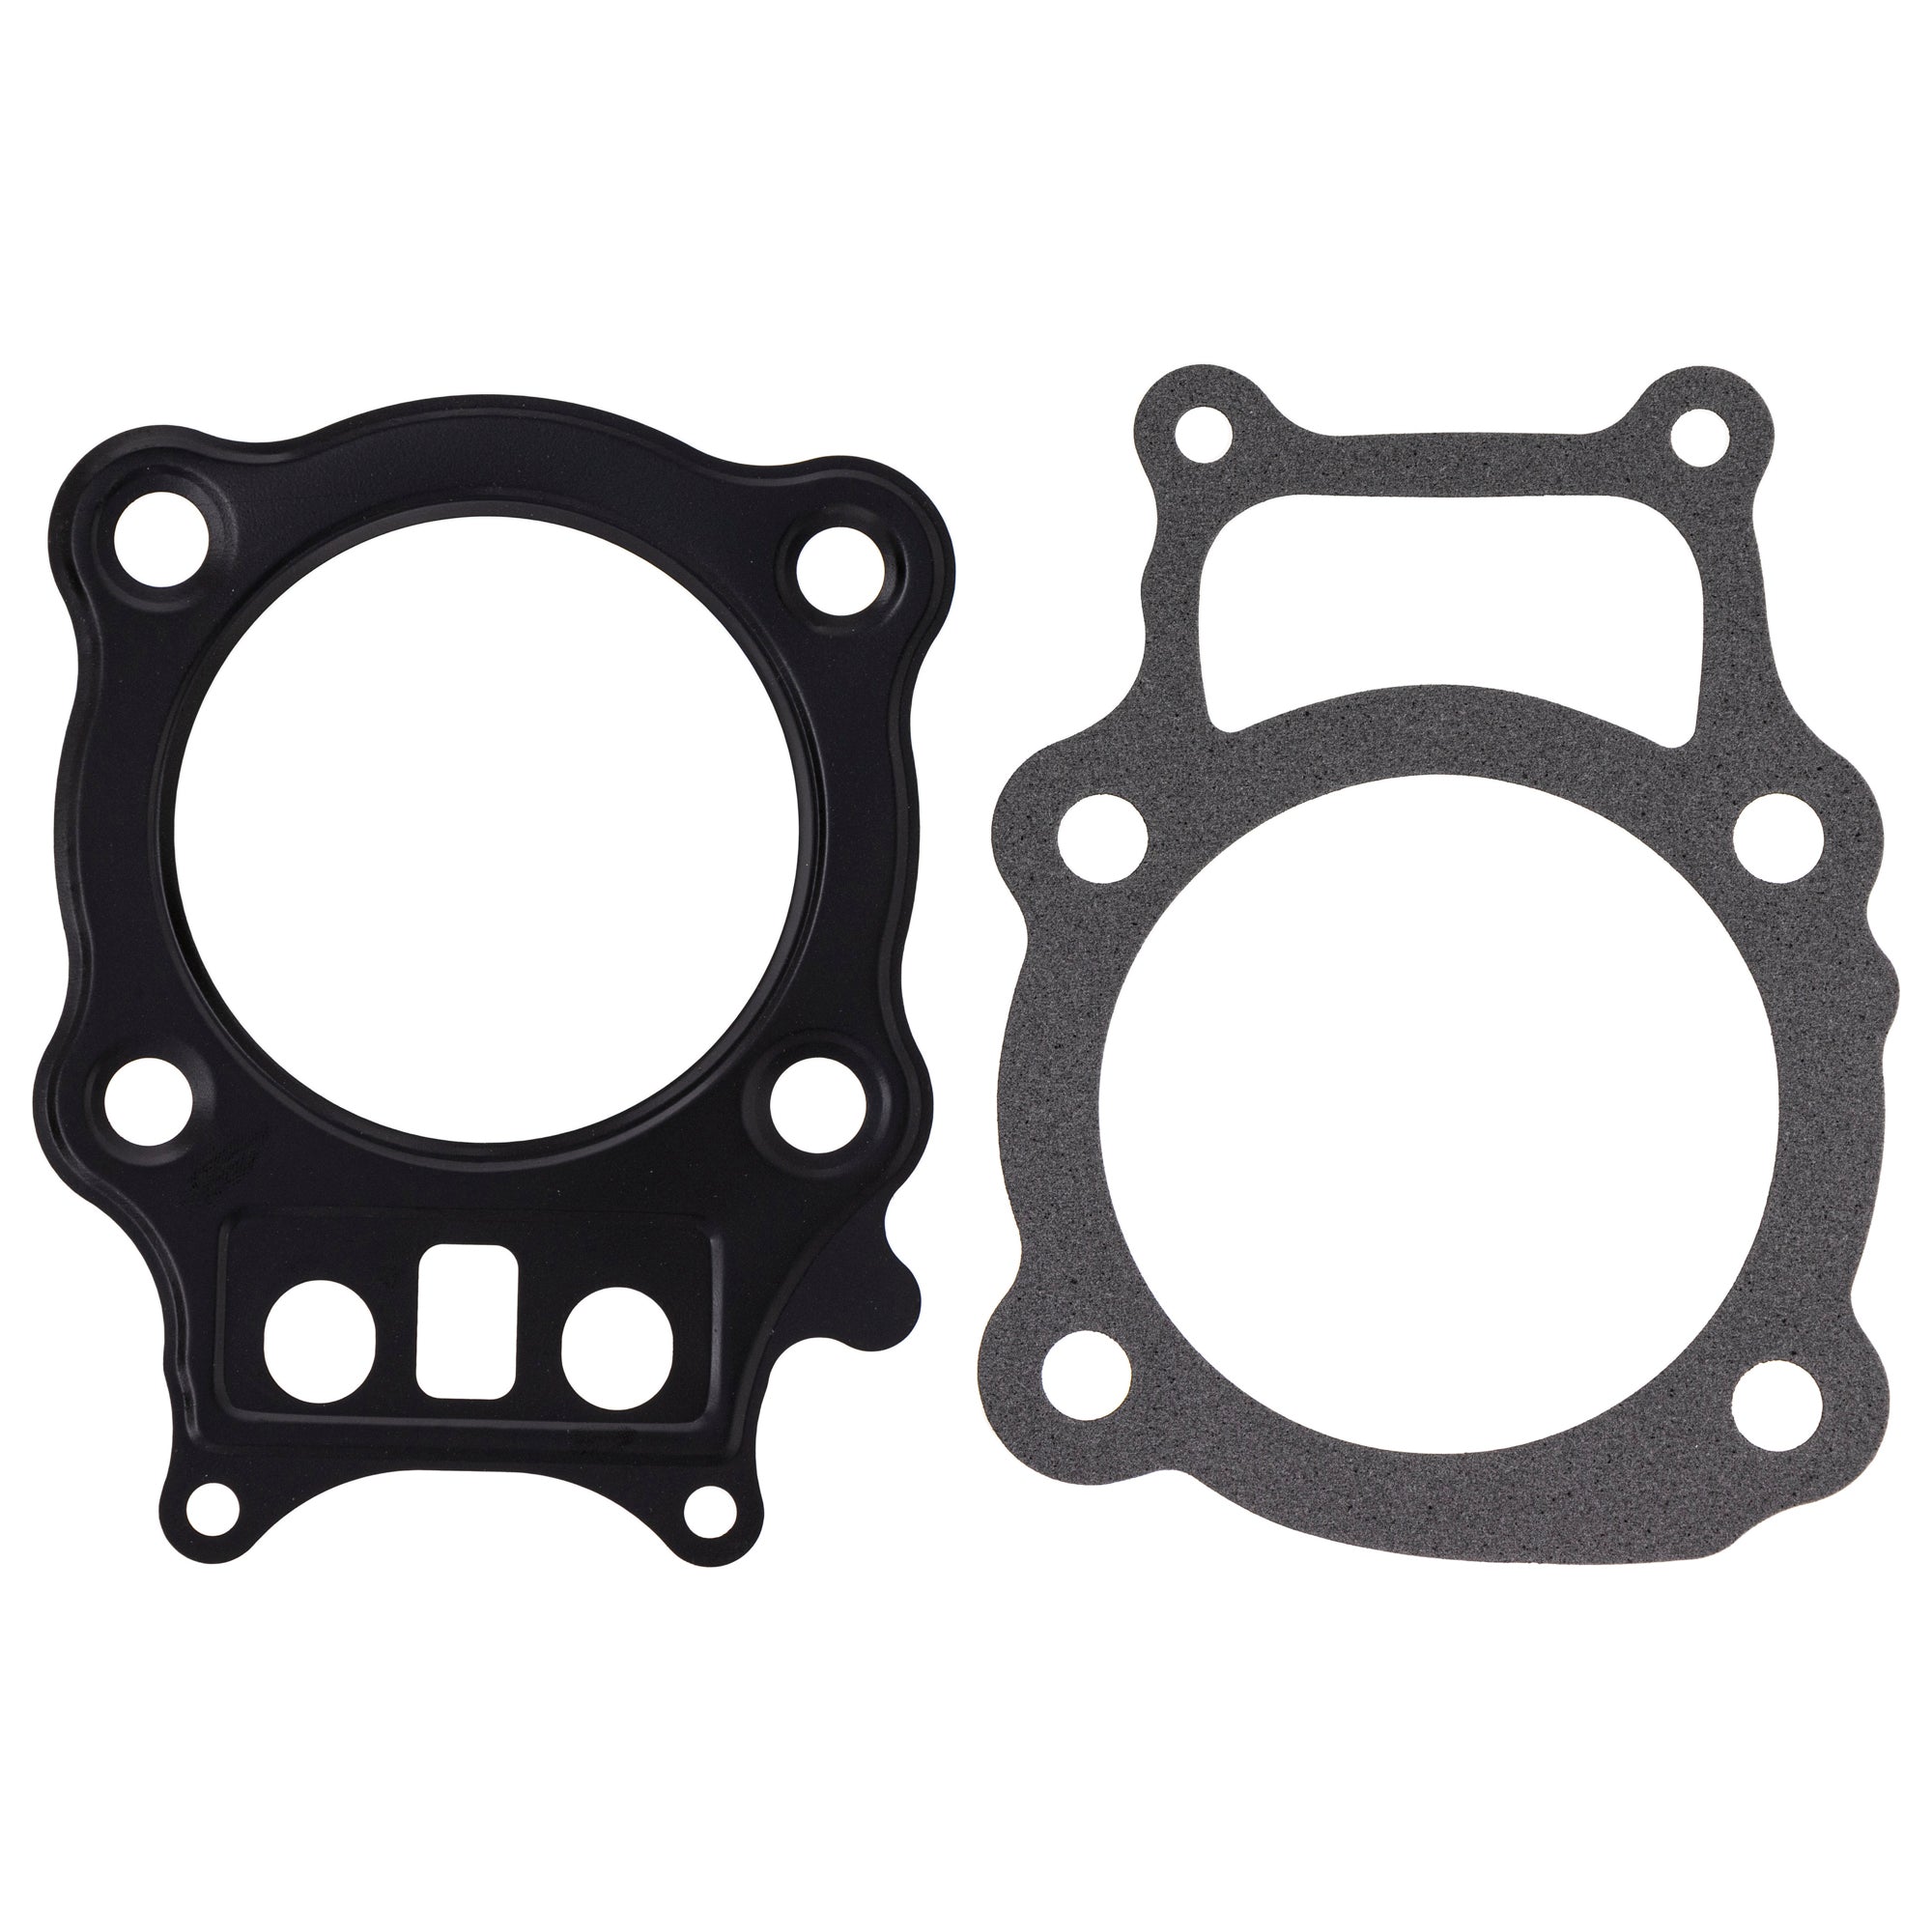 Wiseco Piston Cylinder Gasket Head Top End Kit for Honda Rancher